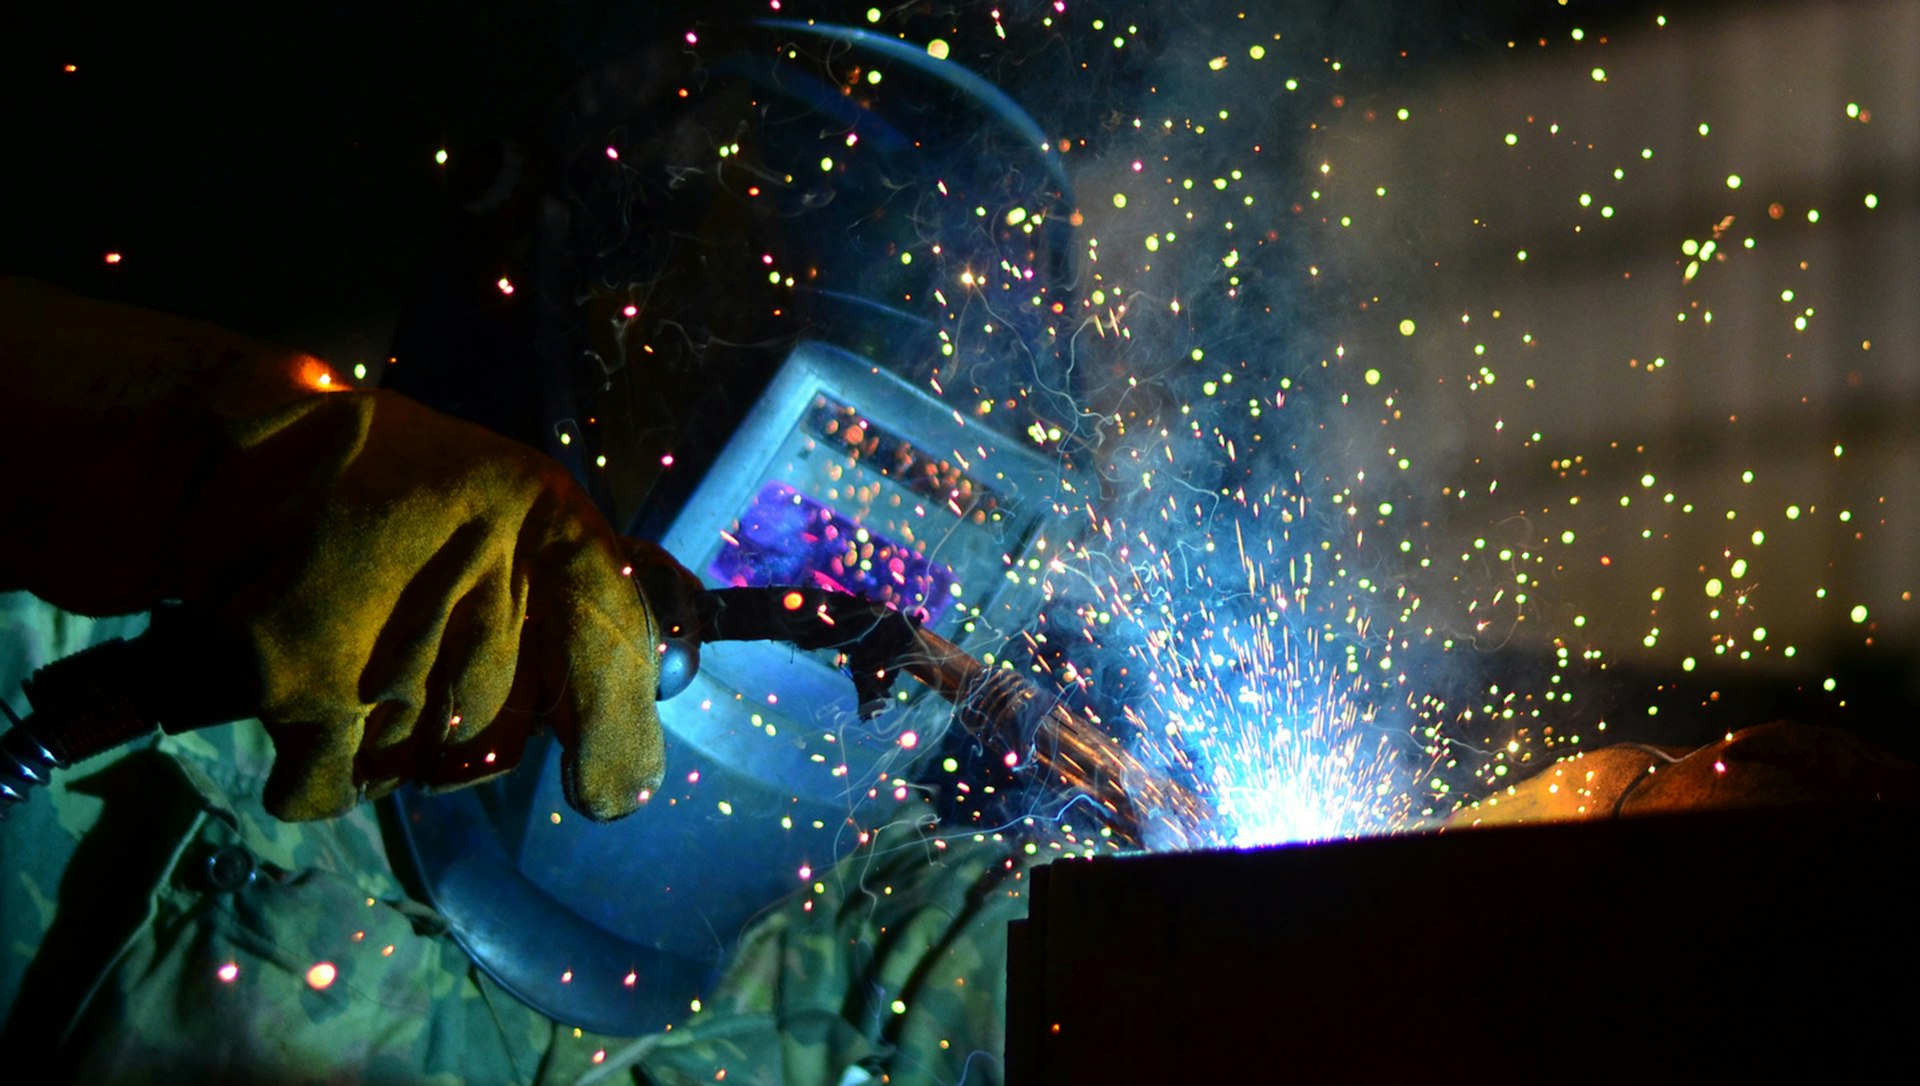 Welder does his job, sparks are flying